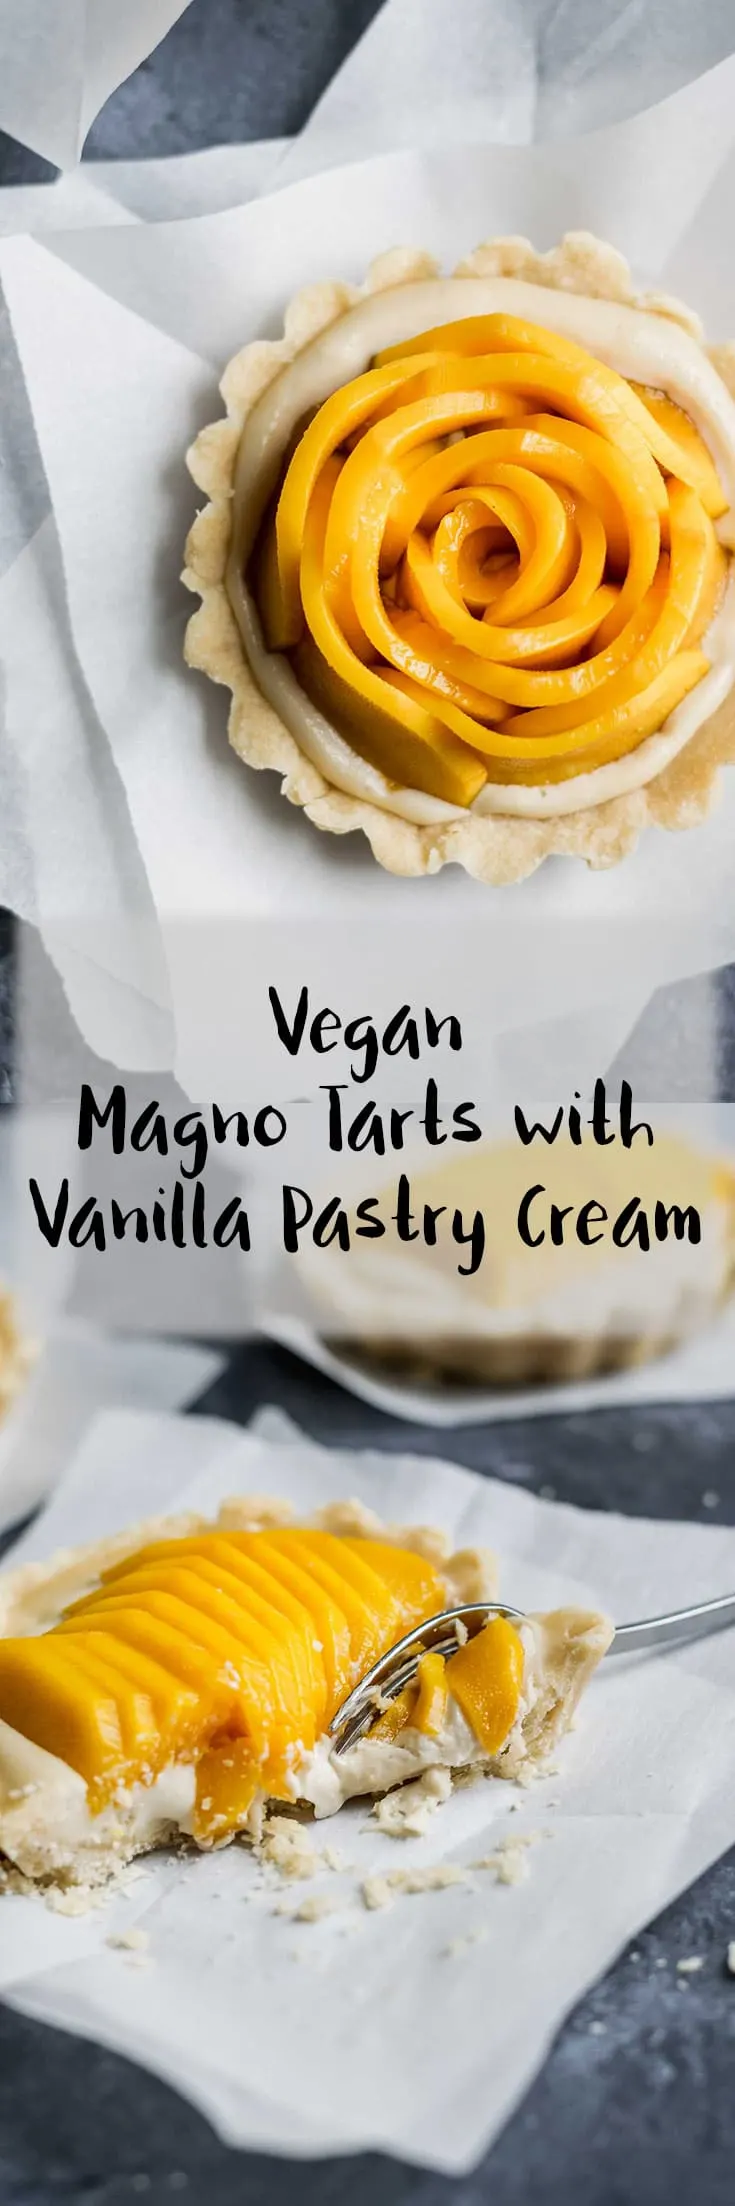 Buttery shortbread crust is filled with a creamy cashew and coconut based pastry cream and topped with fresh cut mango for a delicious sweet vegan treat. | thecuriouschickpea.com #vegan #vegandessert #mangoes #veganrecipes